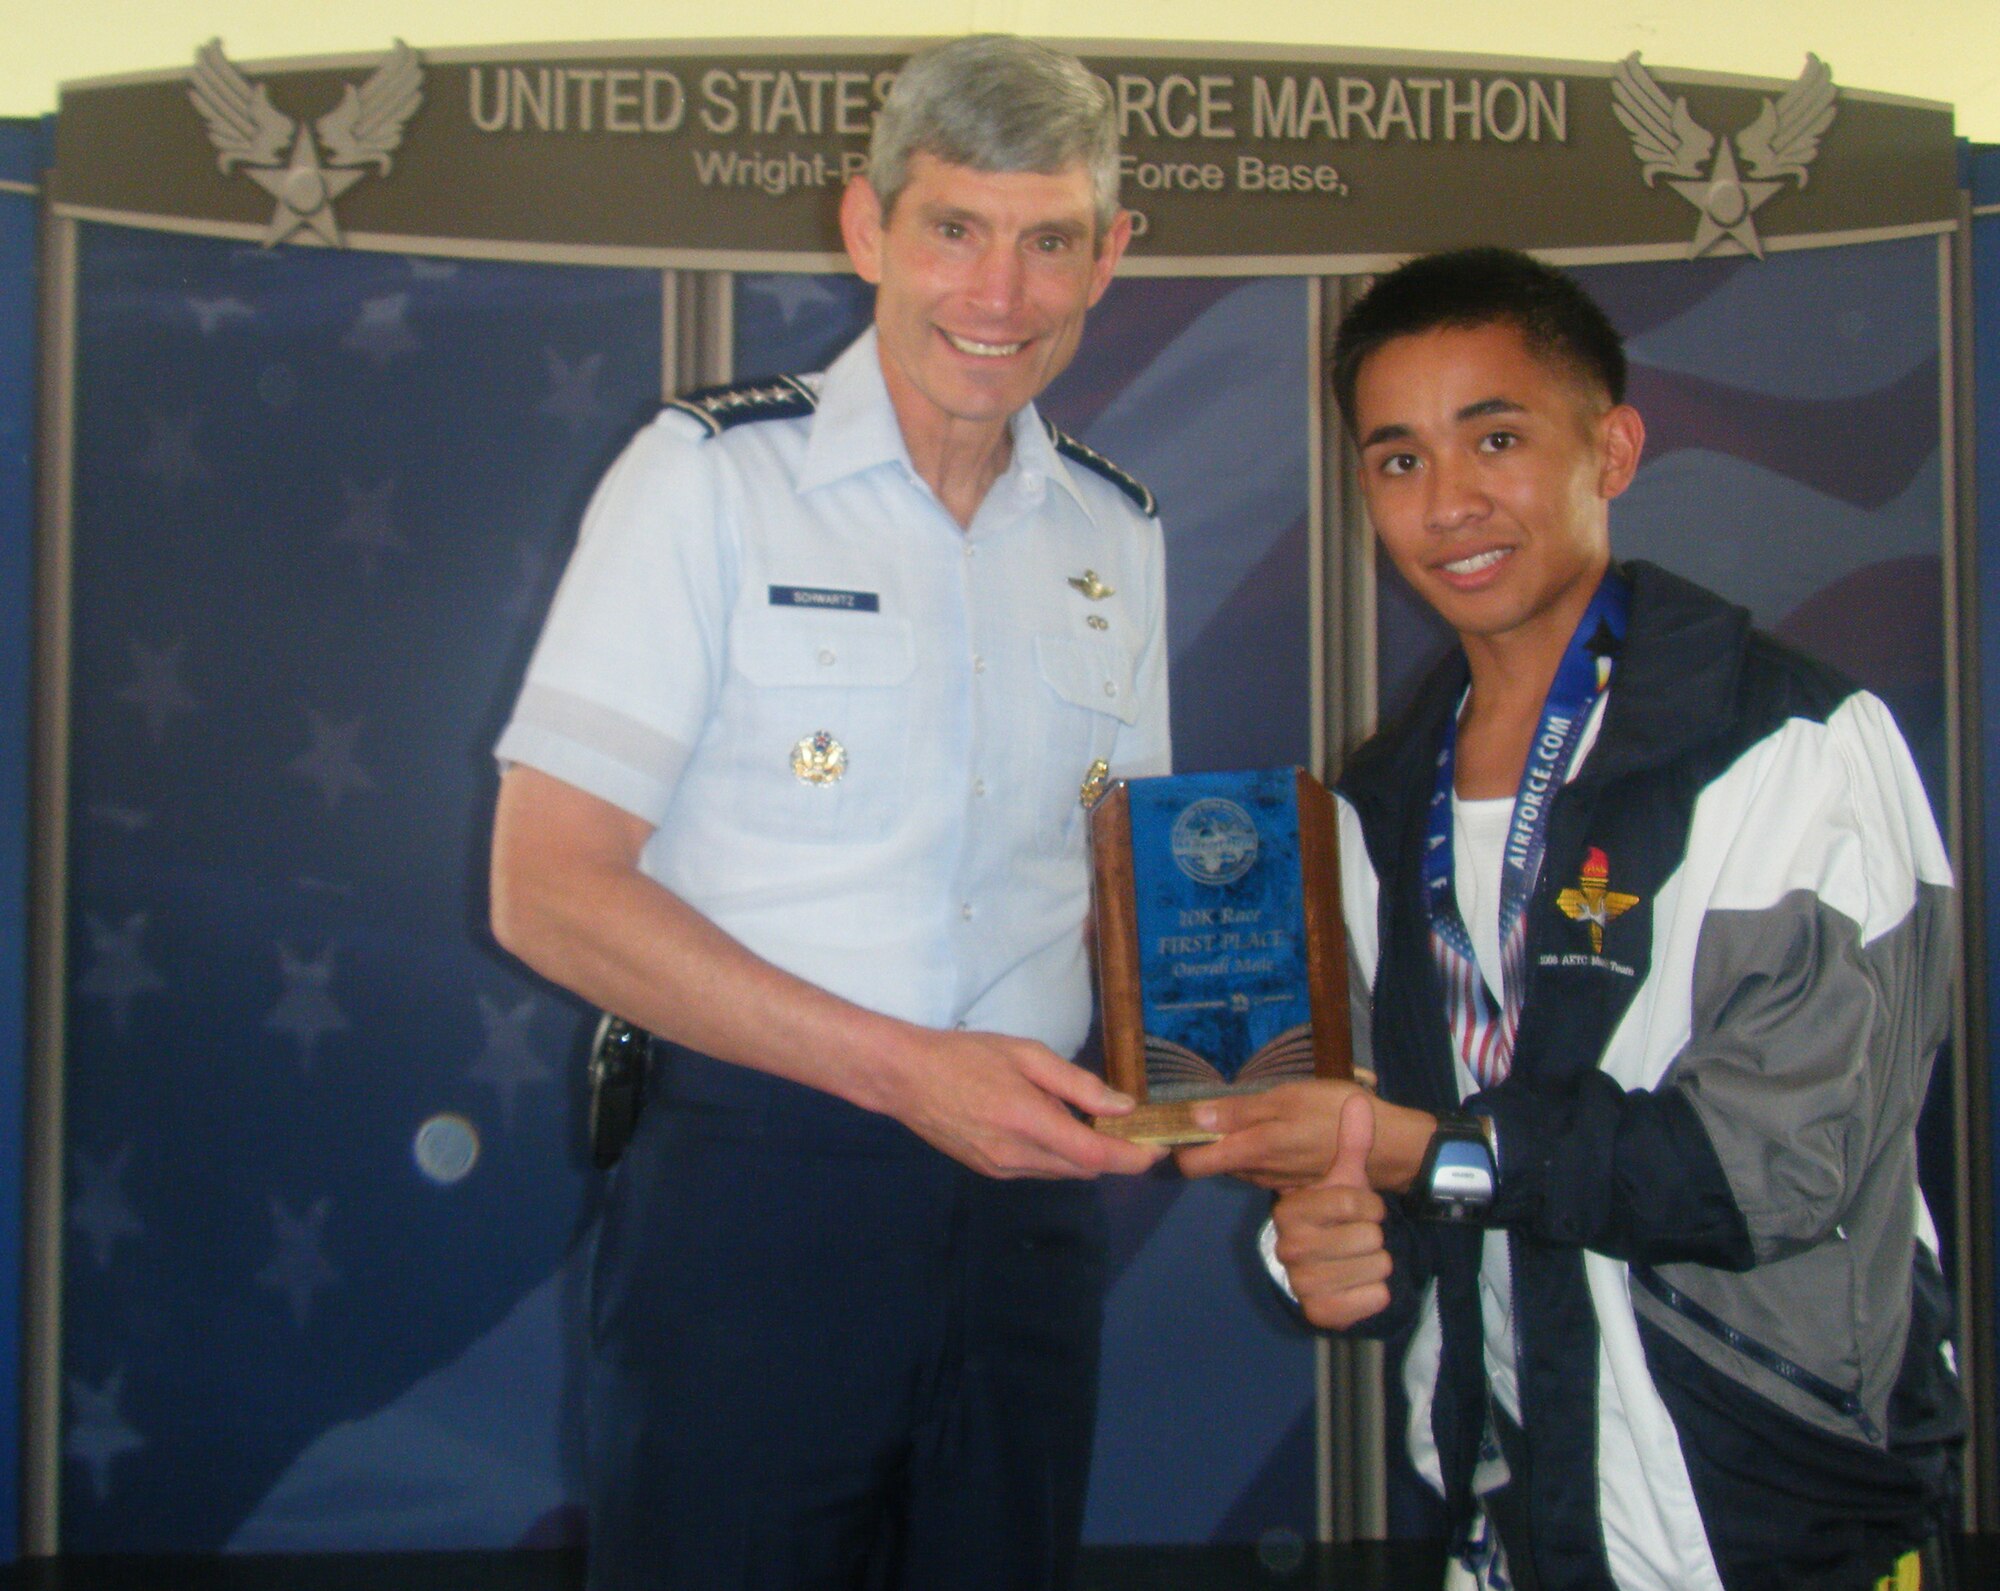 Chief of Staff of the Air Force Norton A. Schwartz awarded Senior Airman Kristoffer Chacon, 325th Force Support Squadron Food Specialist with a trophy for his first place win in the Air Force Marathon 10K, Sept 19 at Wright-Patterson Air Force Base. (Courtesy photo)